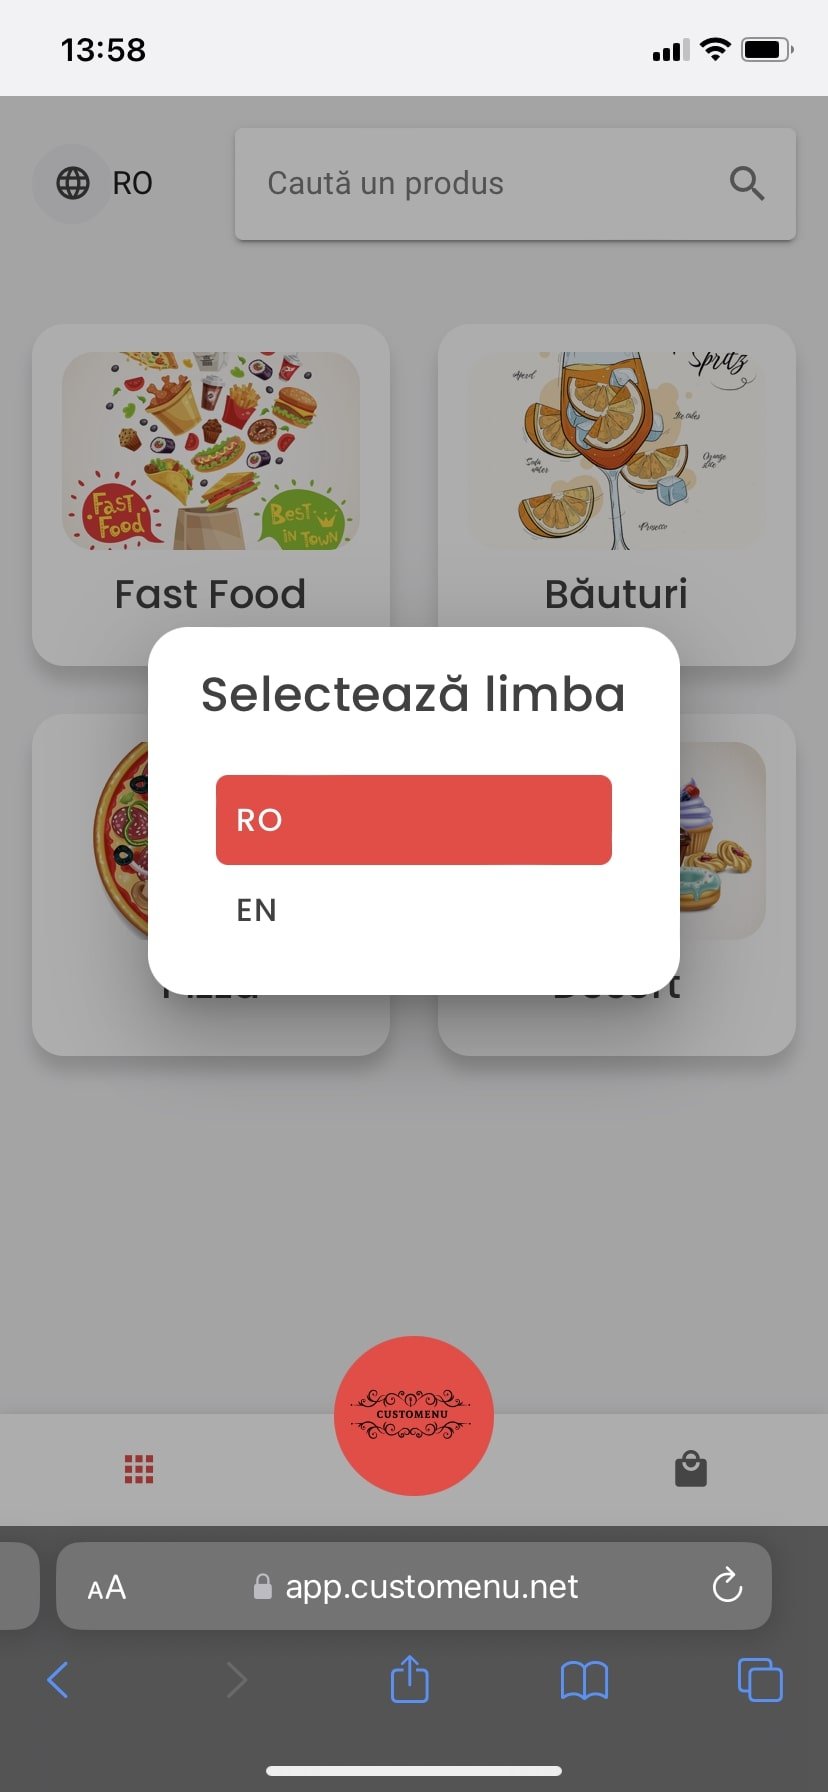 To facilitate access to information in as many languages as possible, the digital menu automatically takes over the language of the browser and displays the information in the selected language.